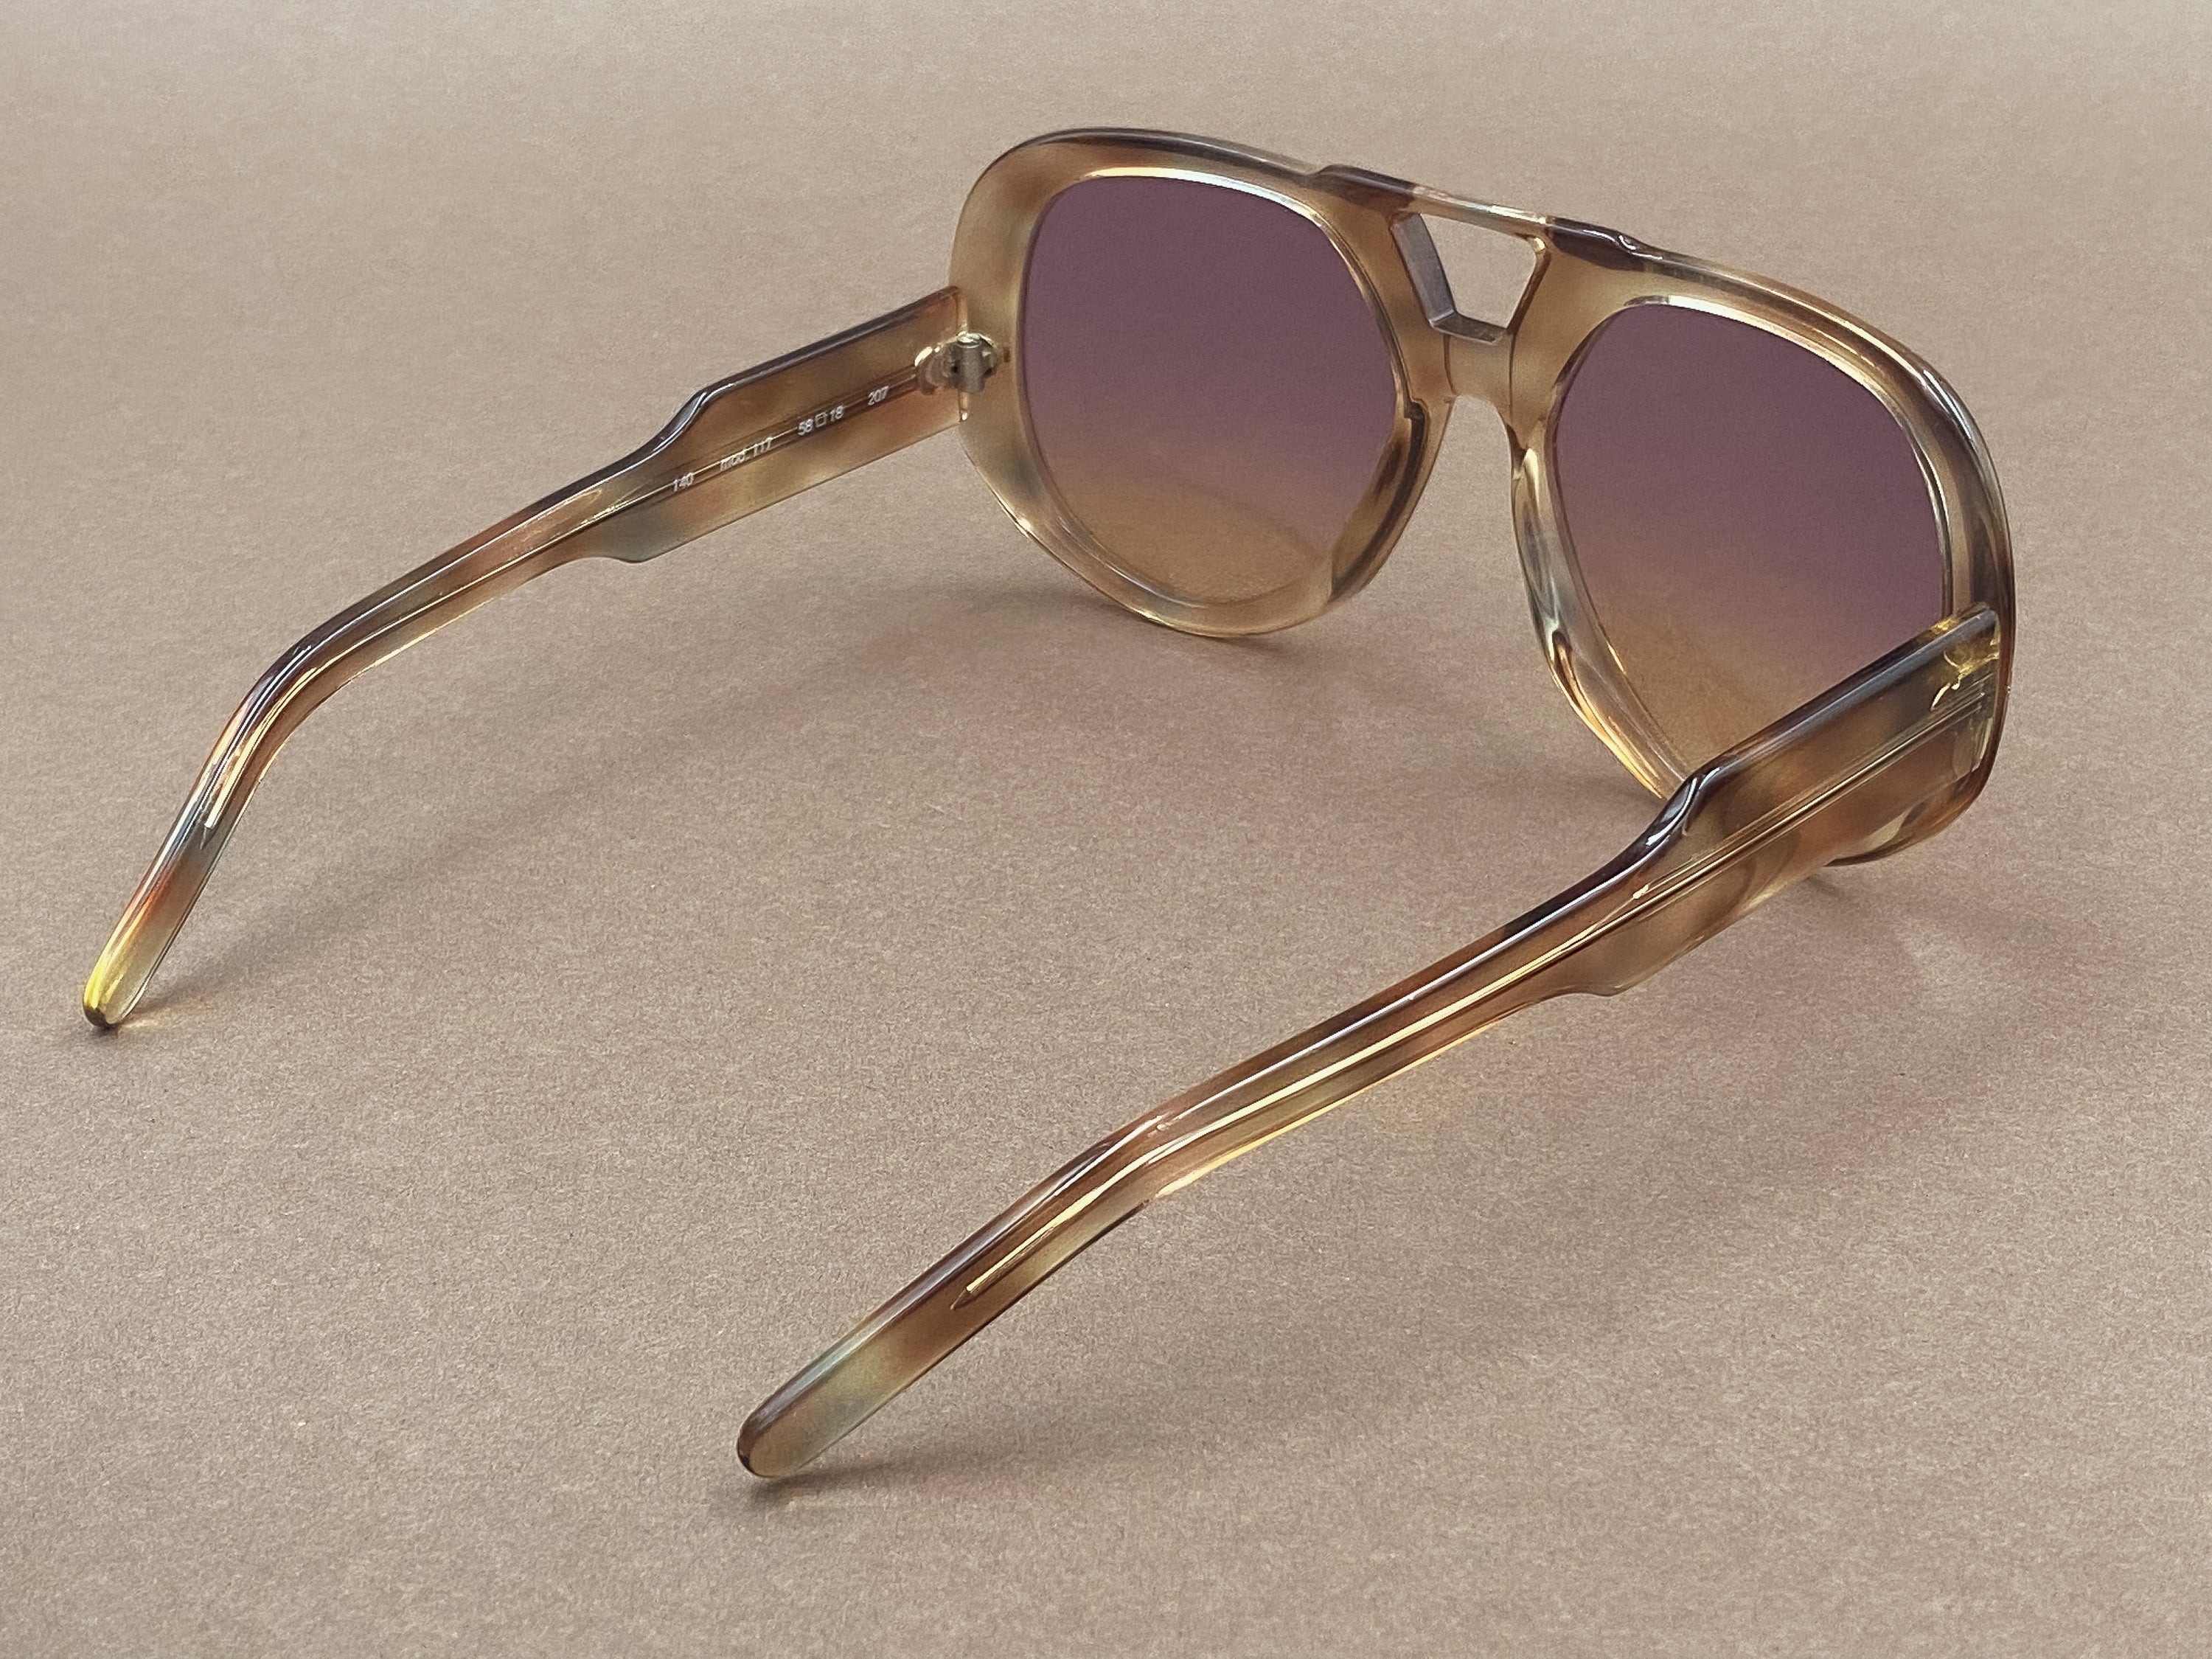 Actuell Couture 114 sunglasses